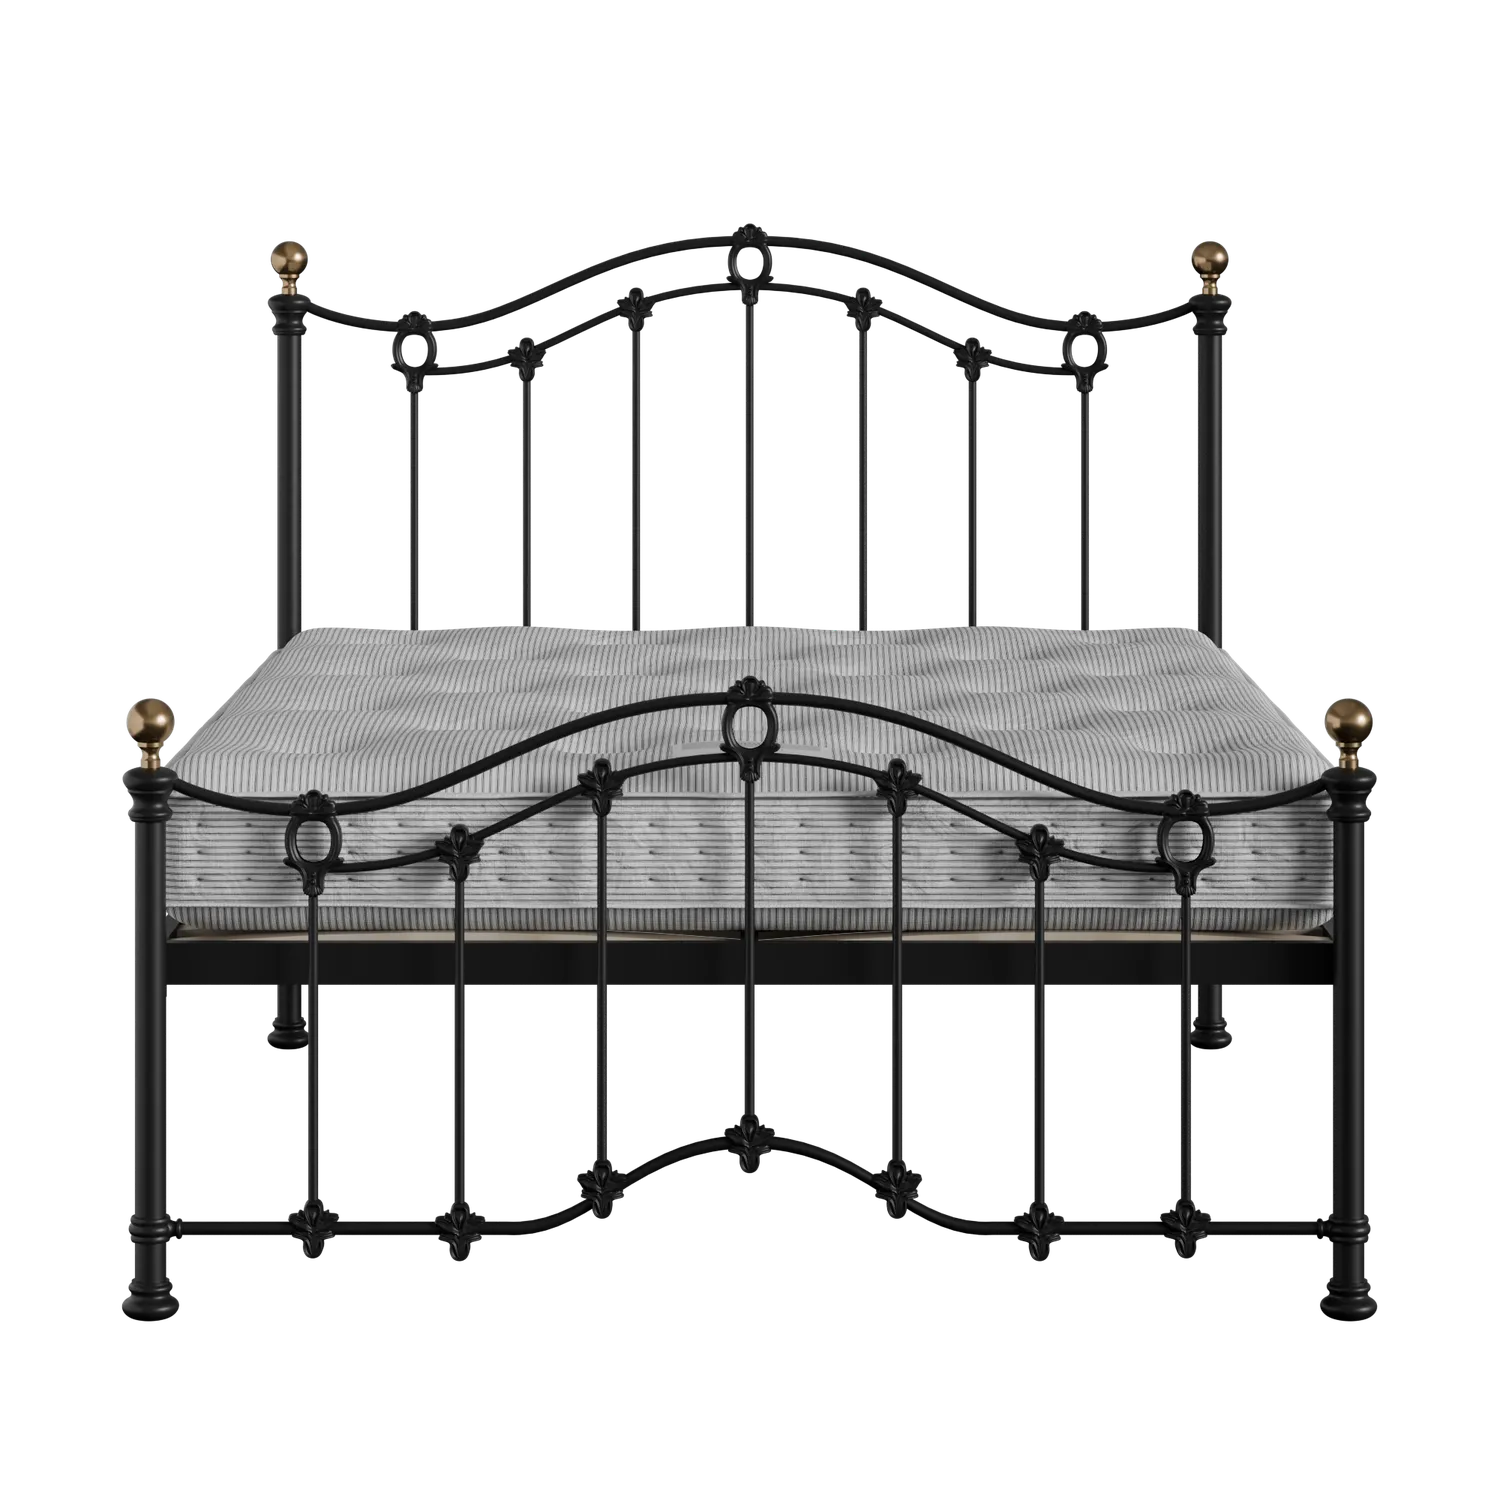 Clarina Low Footend iron/metal bed in black with Juno mattress